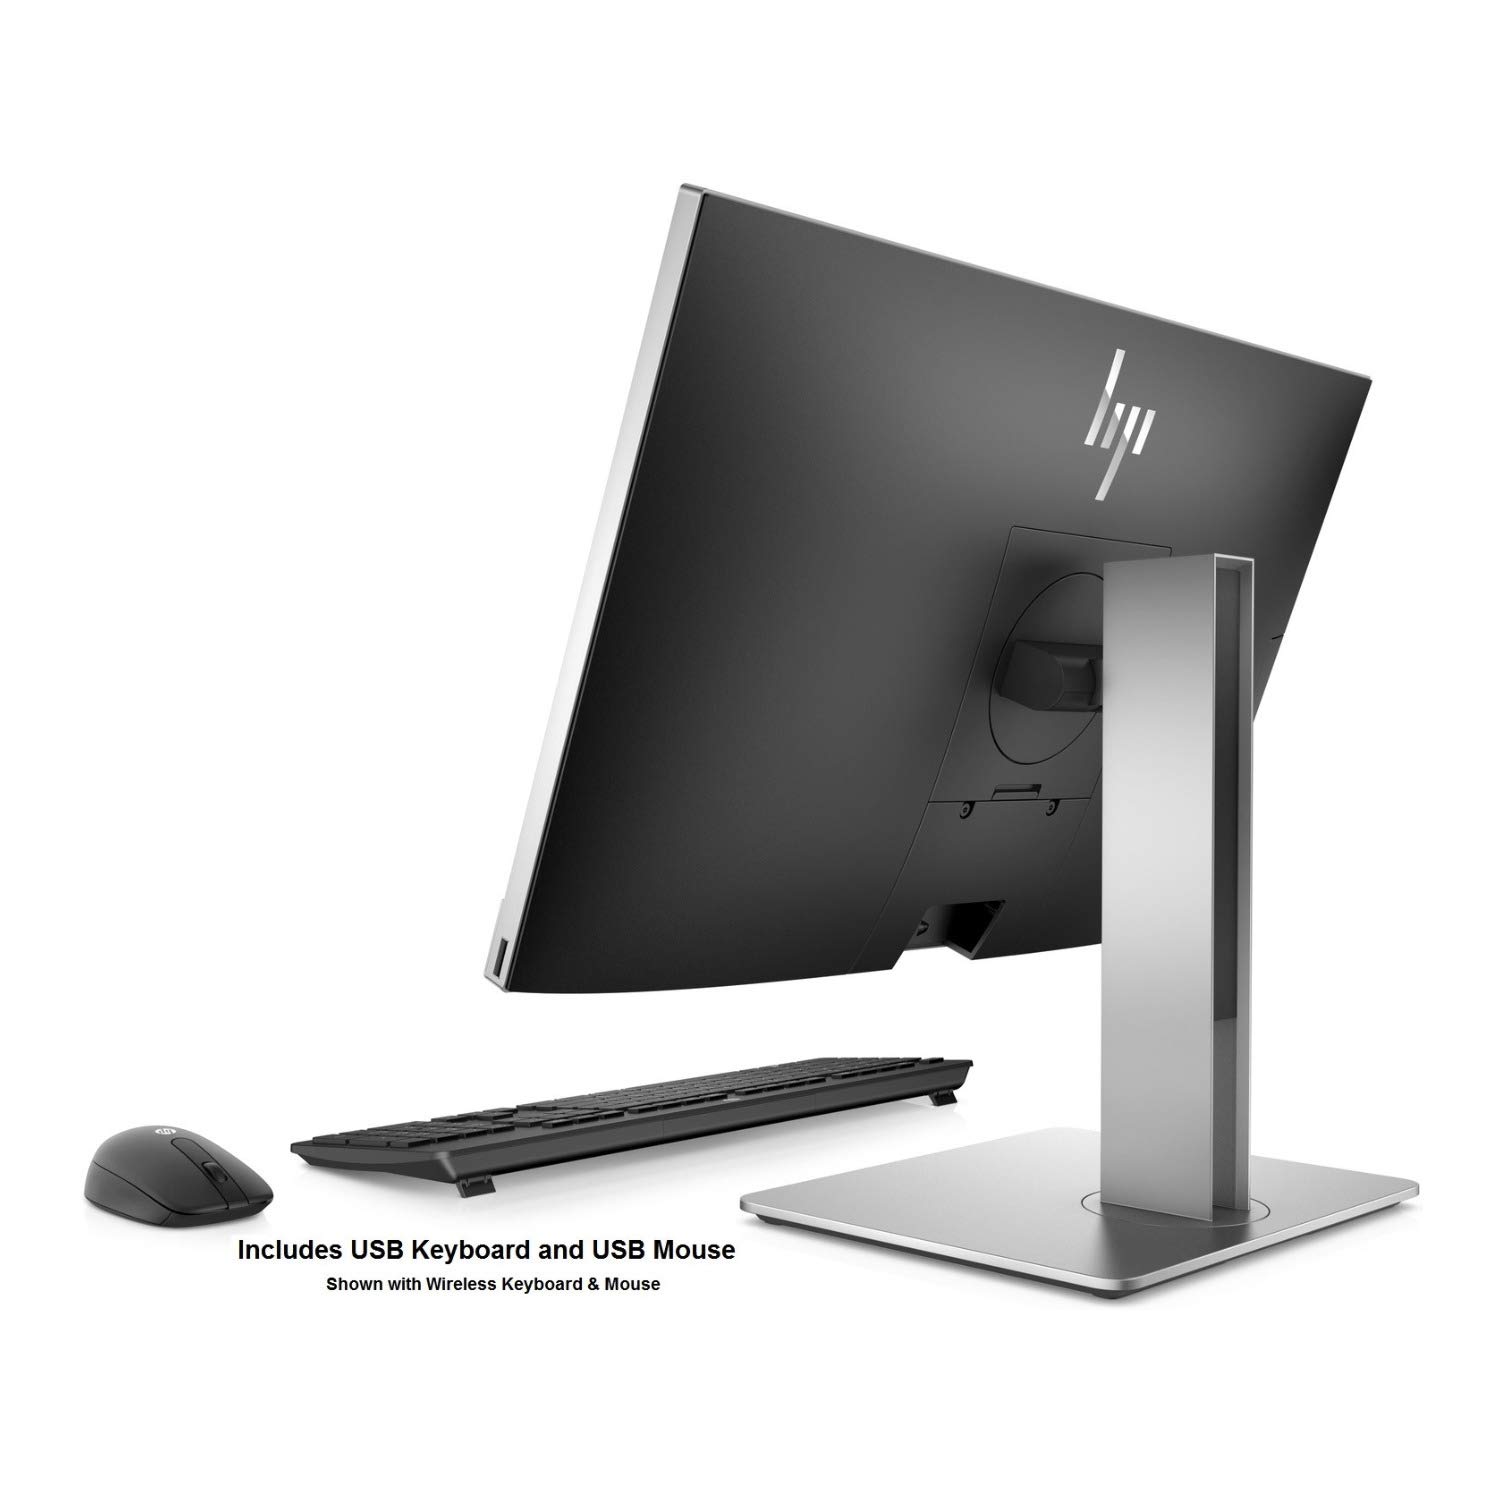 EliteOne 800 G4 23.8-inch Non-Touch All-in-One PC